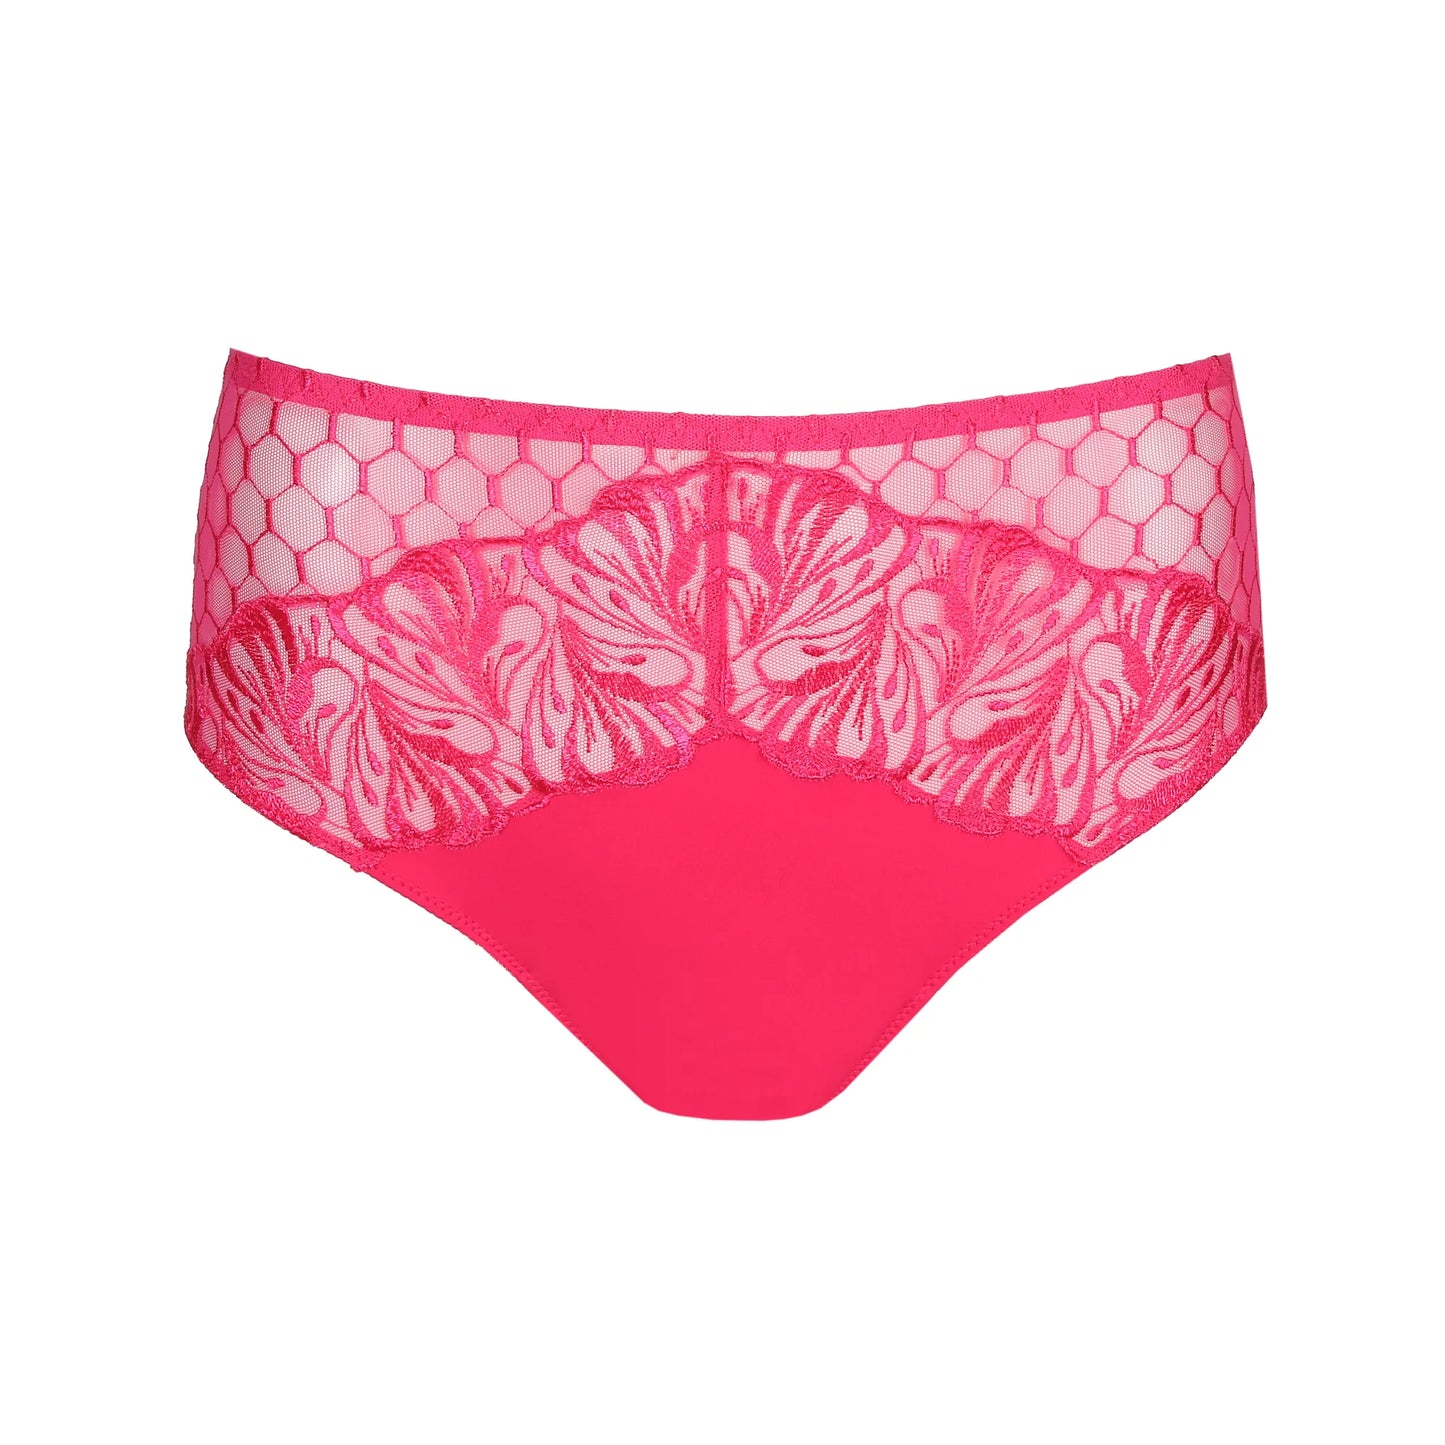 Prima Donna Beugel BH - Disah 0163420 - Electric pink